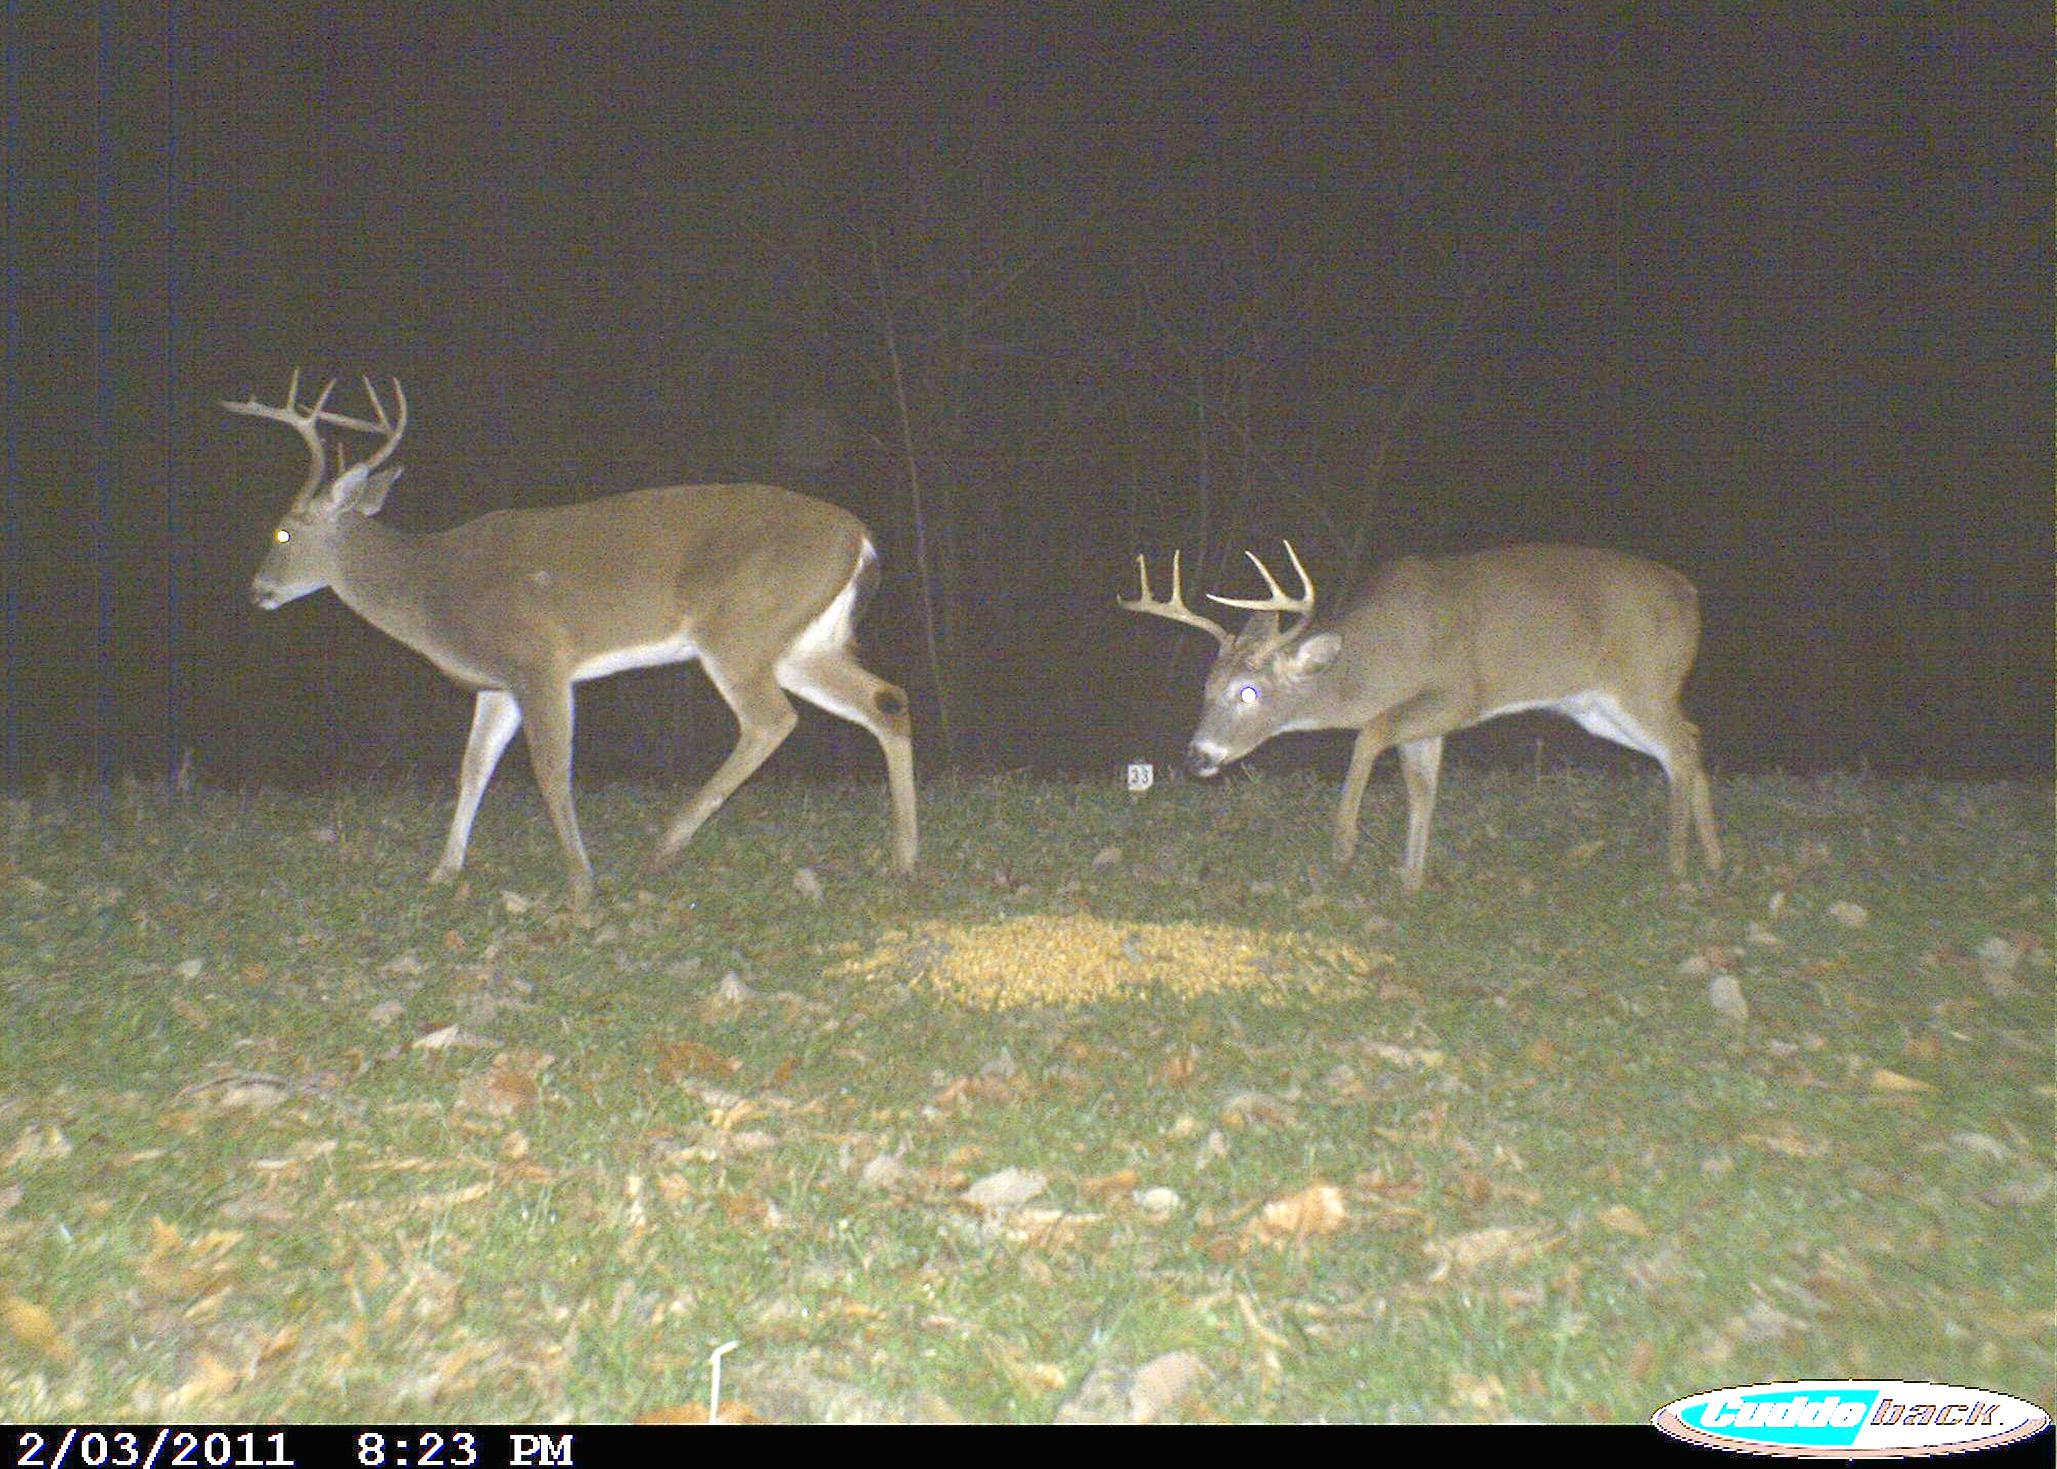 Photos taken using game cameras provide valuable information on deer population statistics, feeding patterns and more. (Photo courtesy of MSU Department of Wildlife, Fisheries & Aquaculture.)